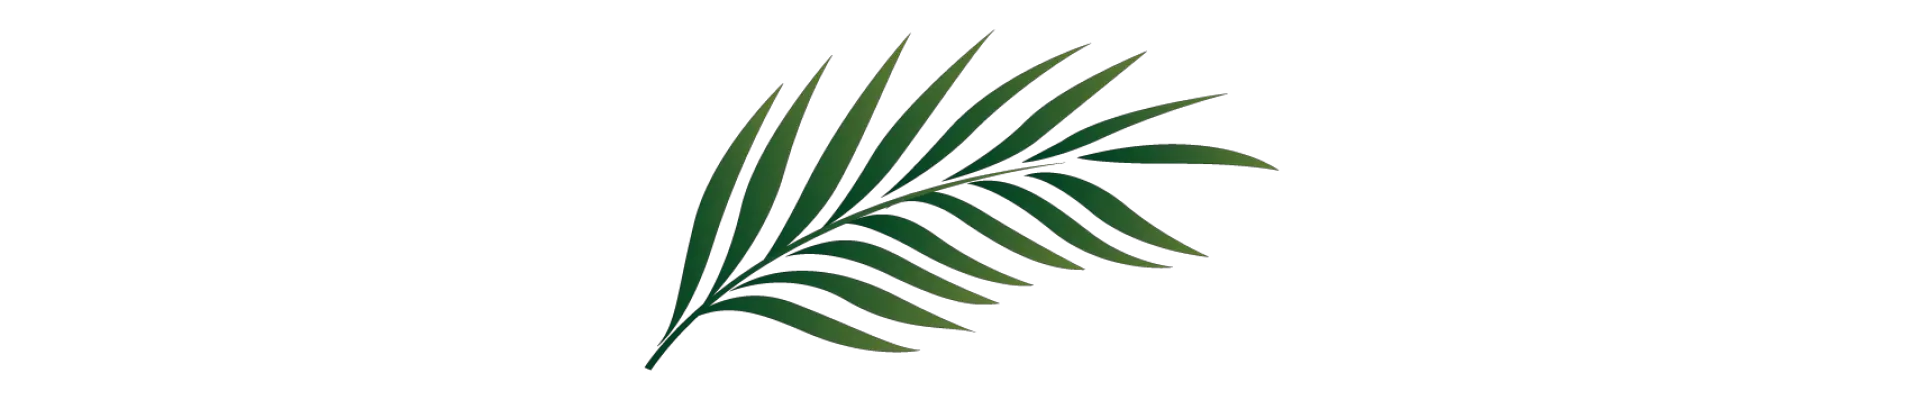 Palm Branch Image Free Cliparts That Palm Leaf Clipart Png Tropical Leaf Png